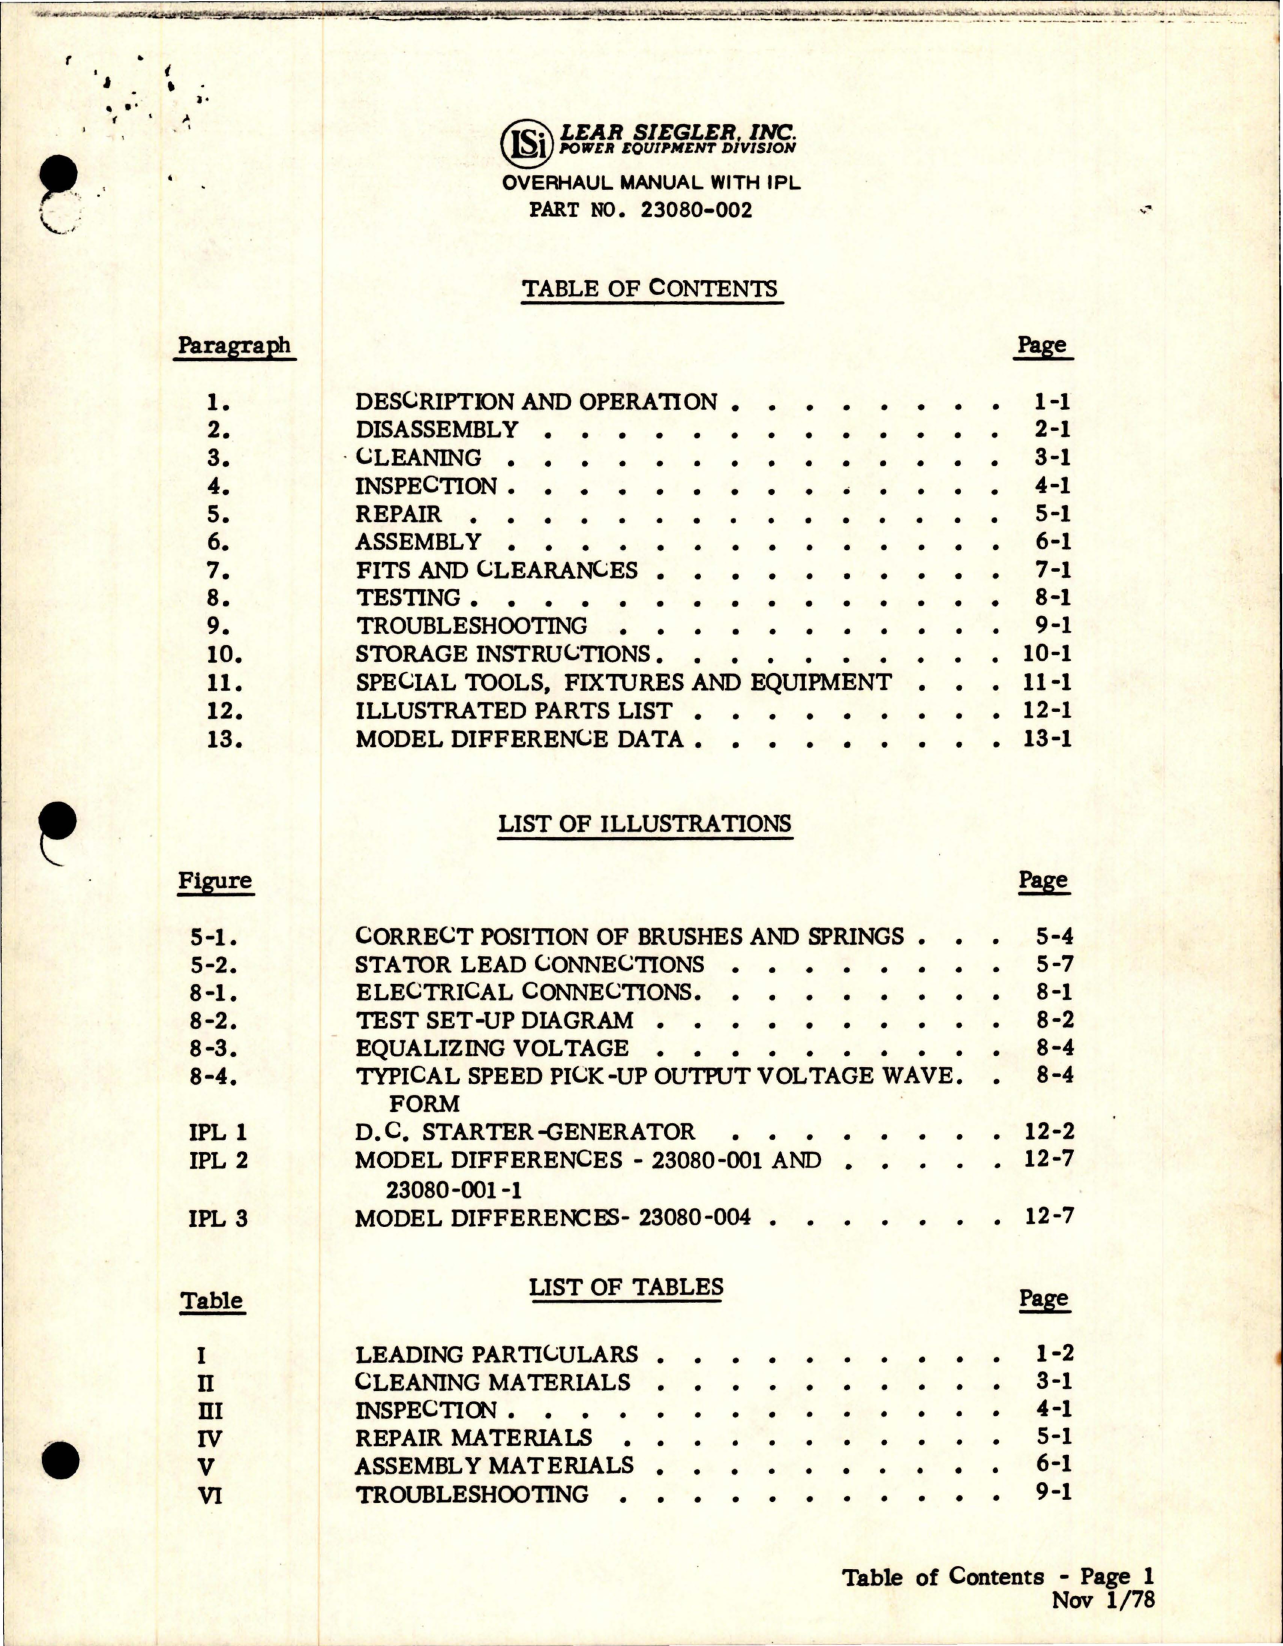 Sample page 9 from AirCorps Library document: Overhaul Manual with Illustrated Parts List for DC Starter Generator - Model 23080 Series